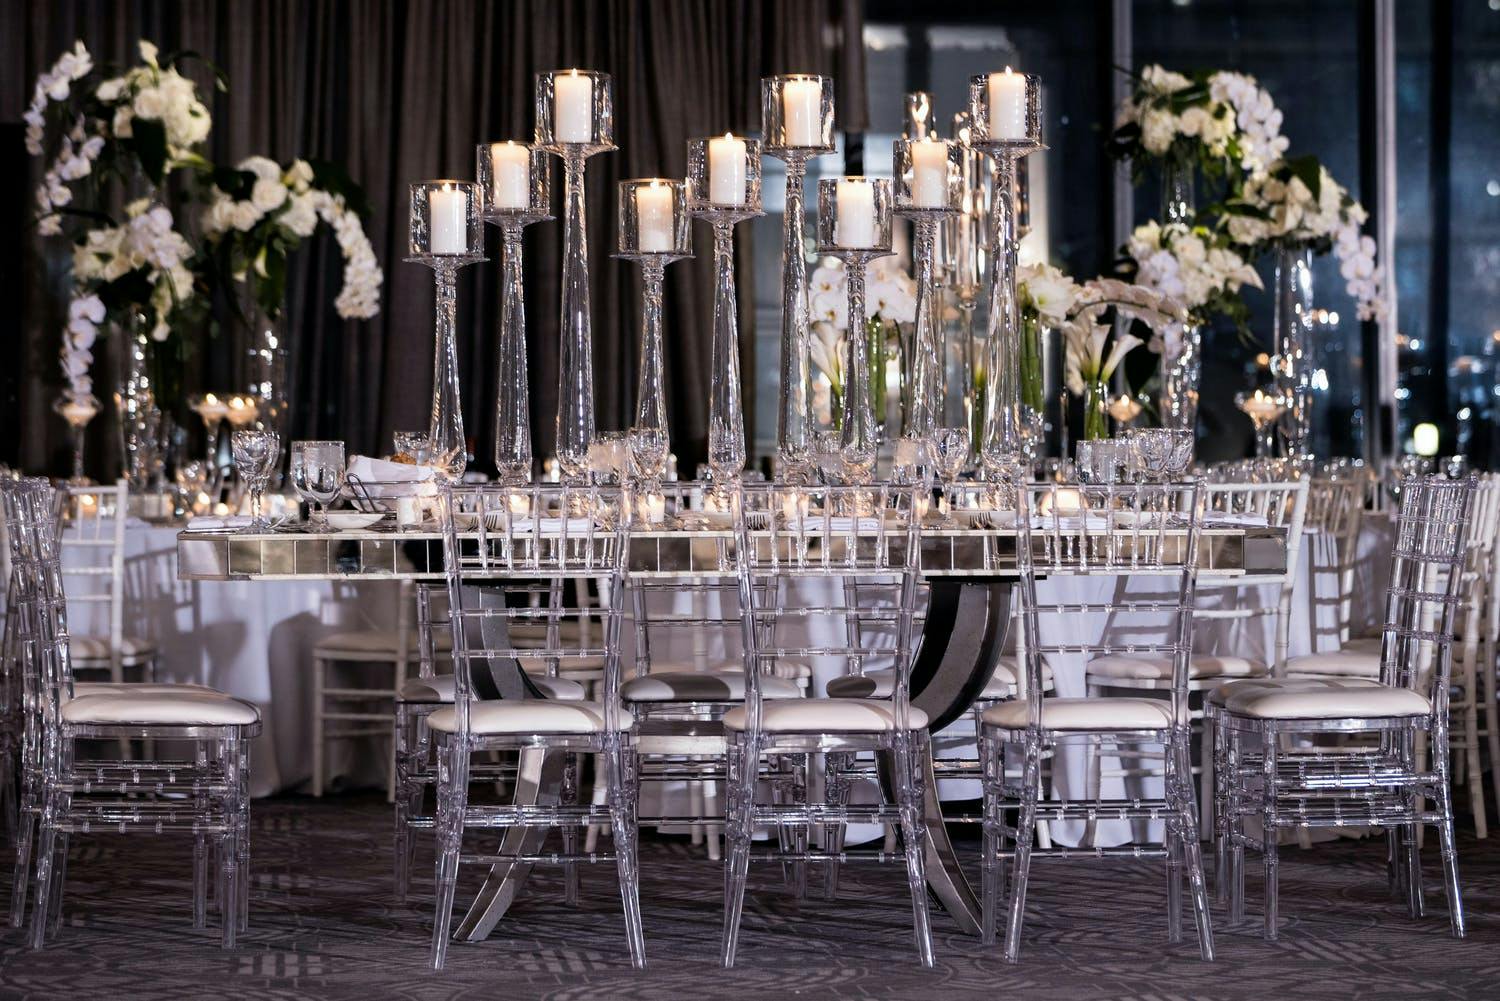 Wedding Tablescape With Lucite Seating and Towering Glass Candleholders | PartySlate